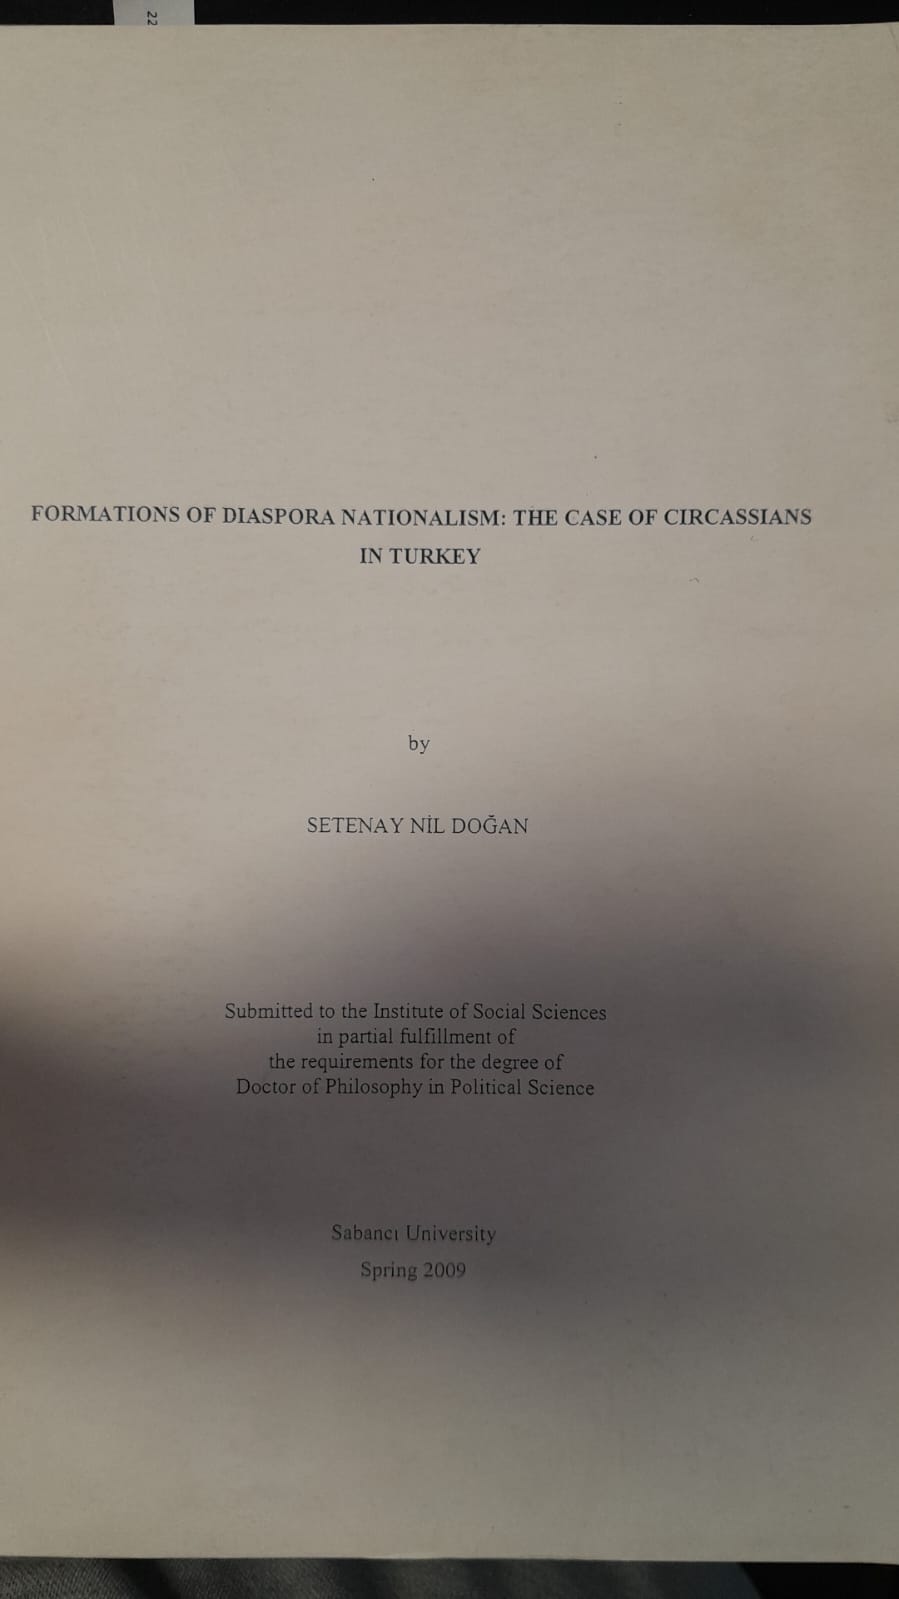 Formations of Diaspora Nationalism: The Case of Circassians in Turkey